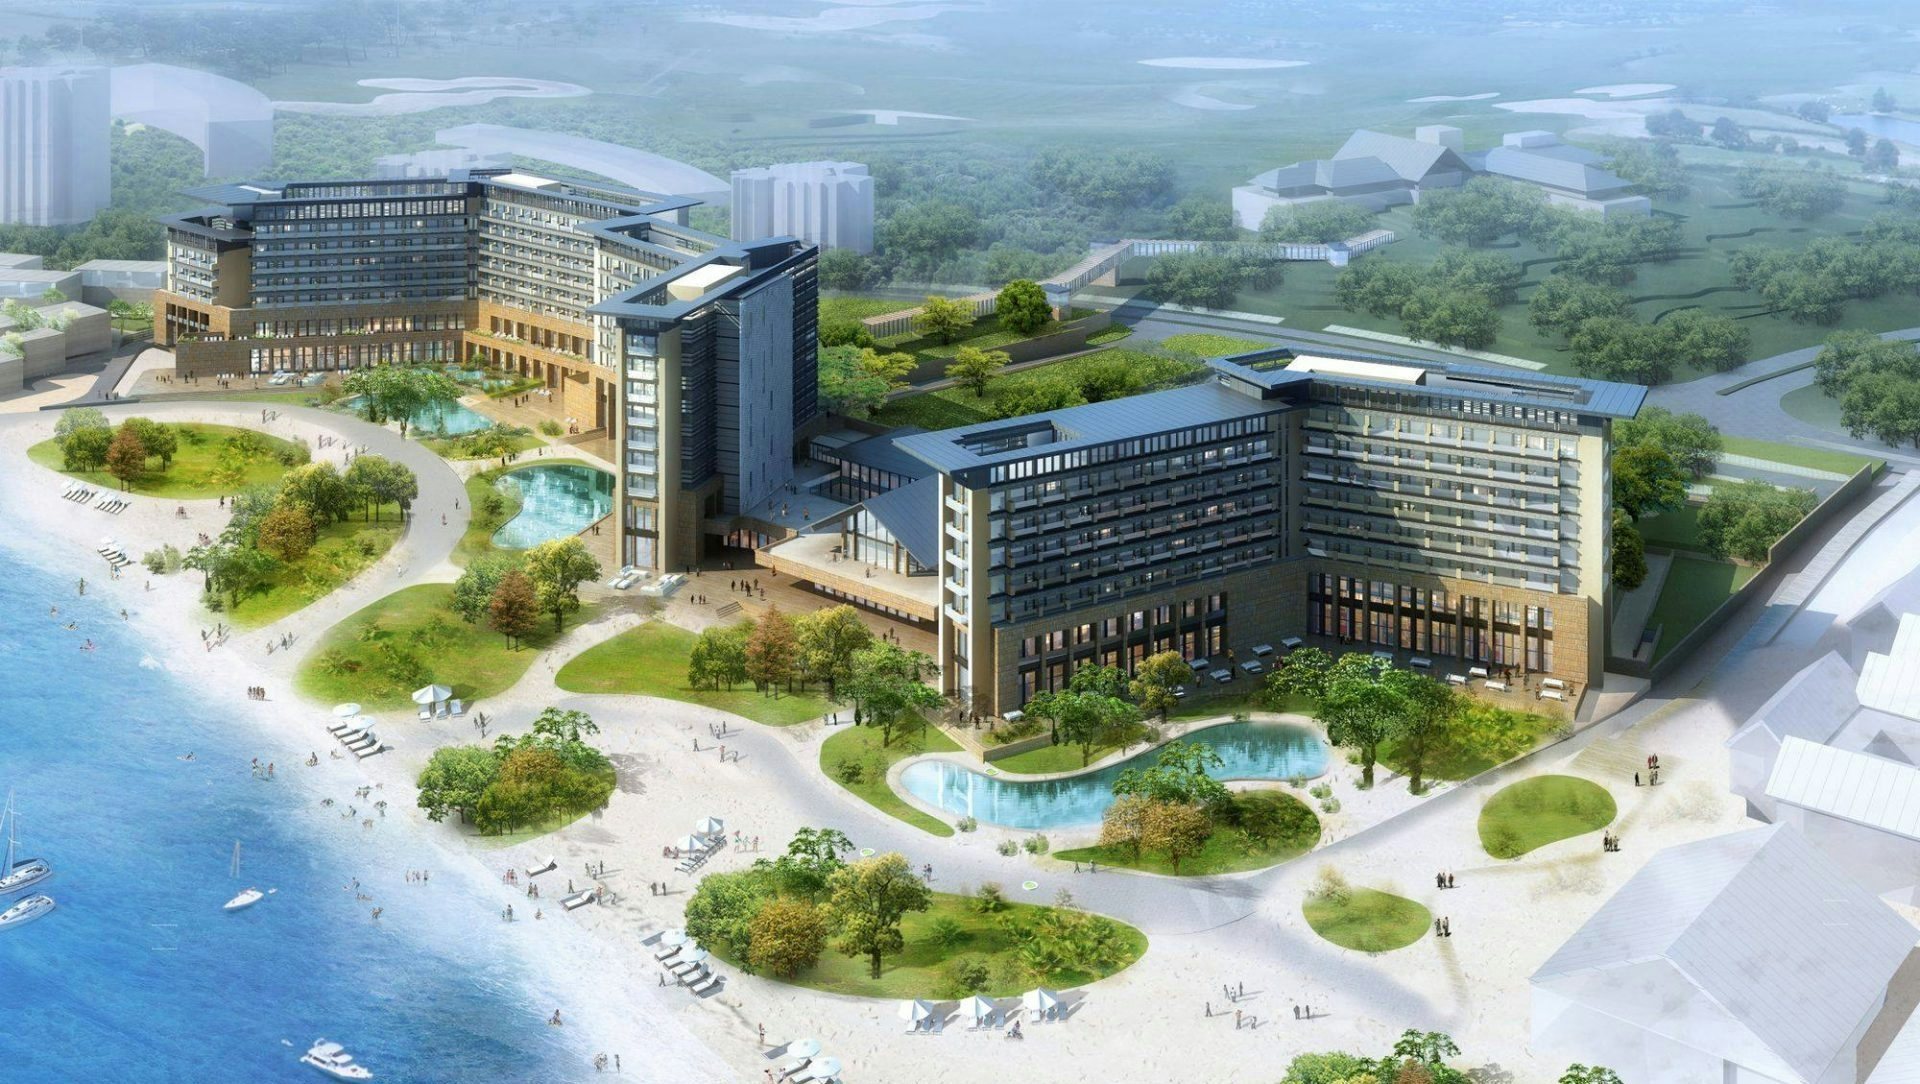 Club Med will open two new resorts in China this year in Anji County, Zhejiang and Changli County, Hebei (pictured above). Photo: Club Med